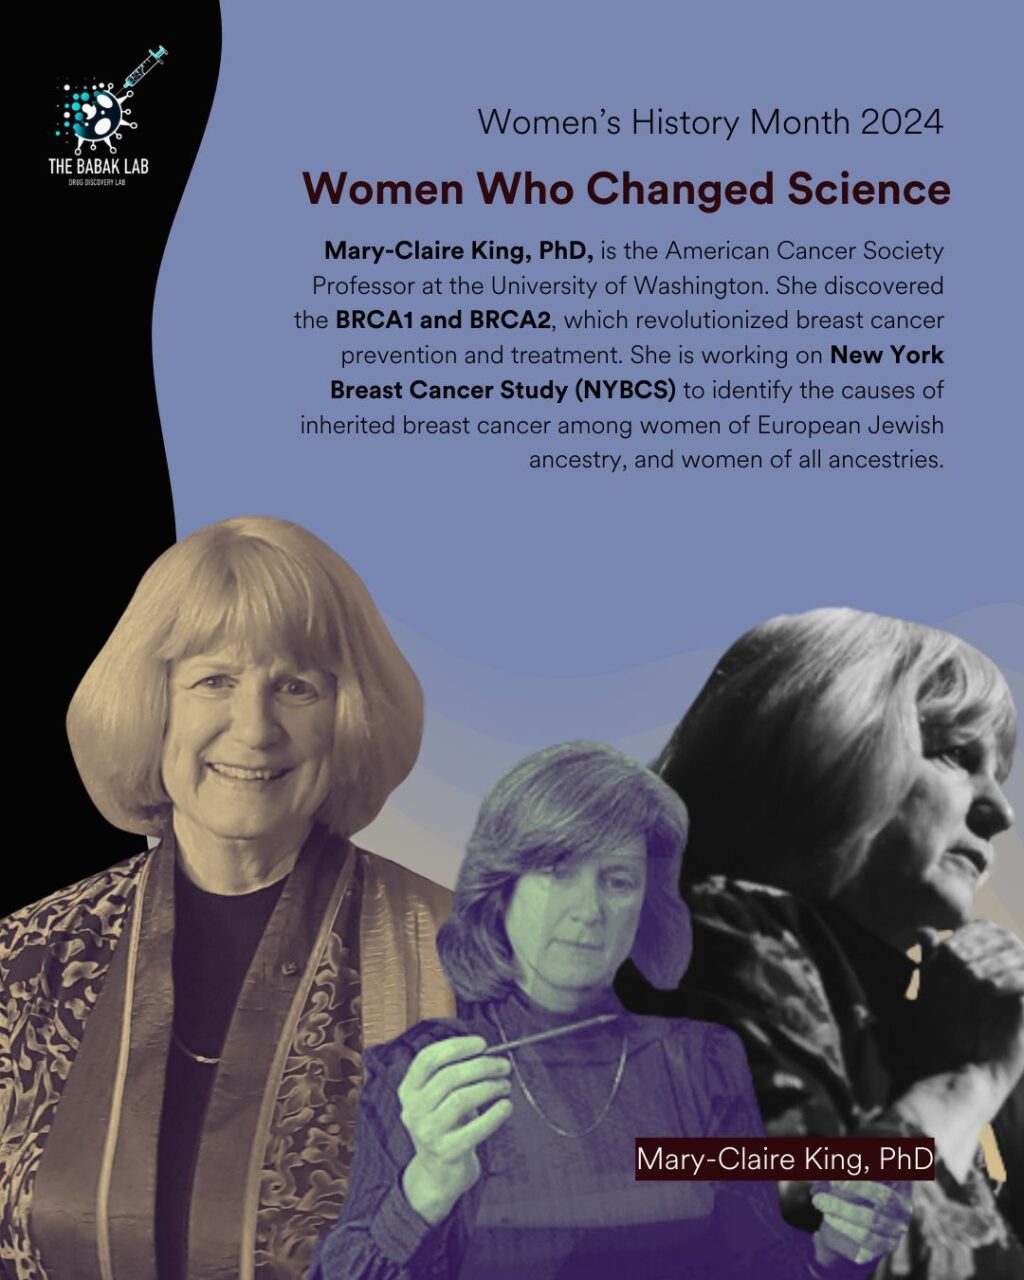 Maria (Masha) Babak: Another important figure we should celebrate this Women’s History Month is Dr. Mary Claire King